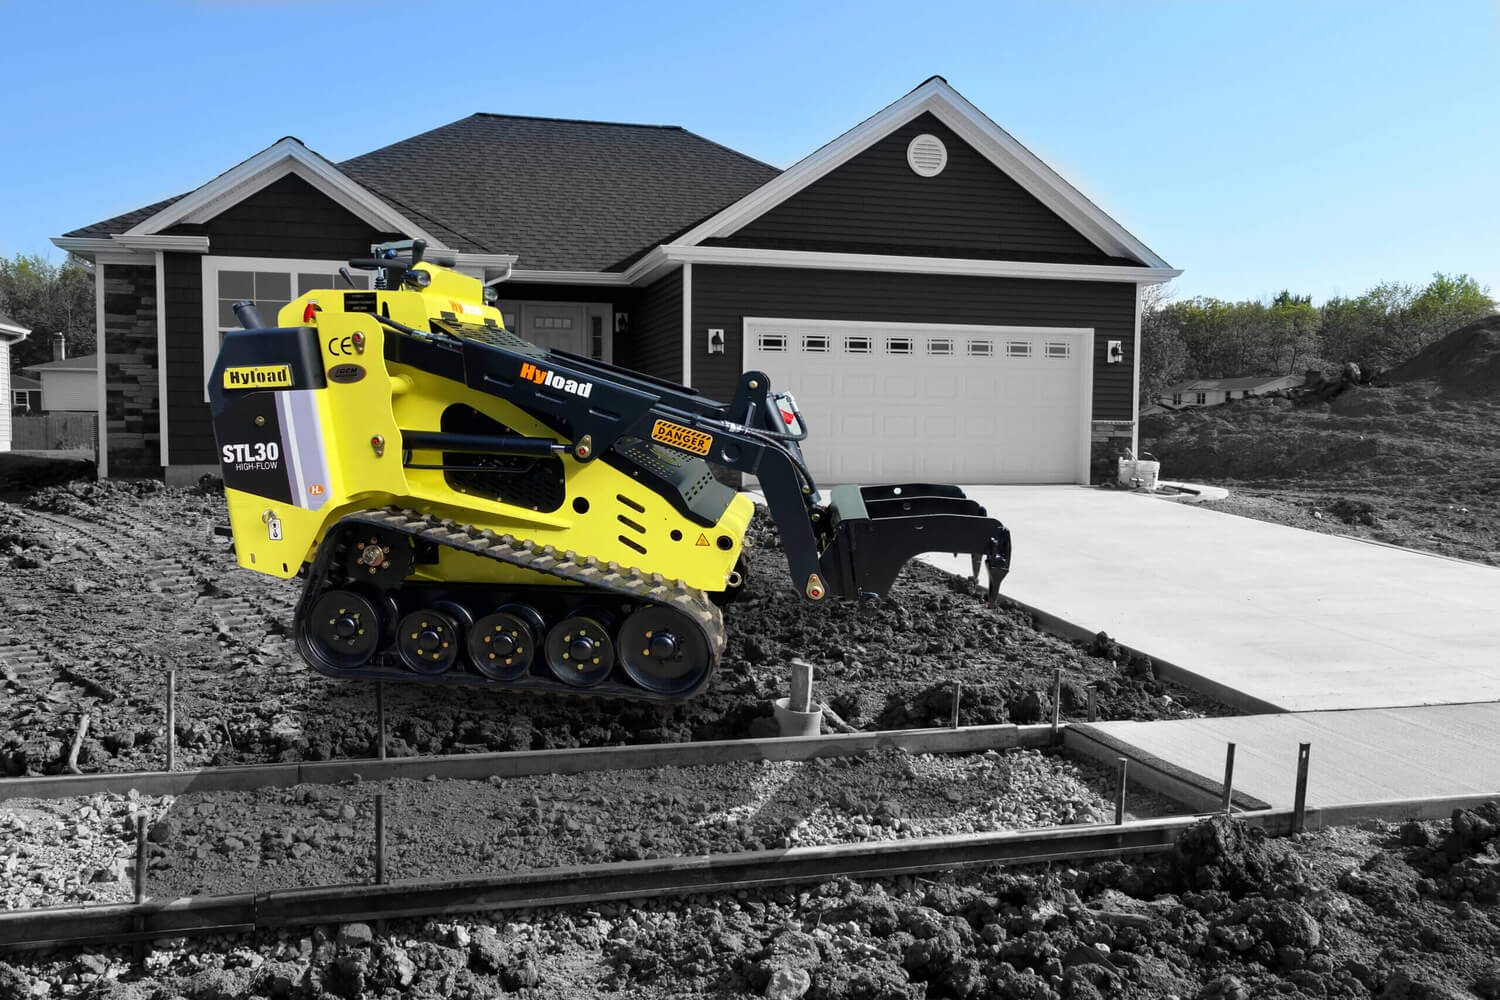 New Home Sidewalk and Driveway Construction with GCM Agencies Backhoe loader